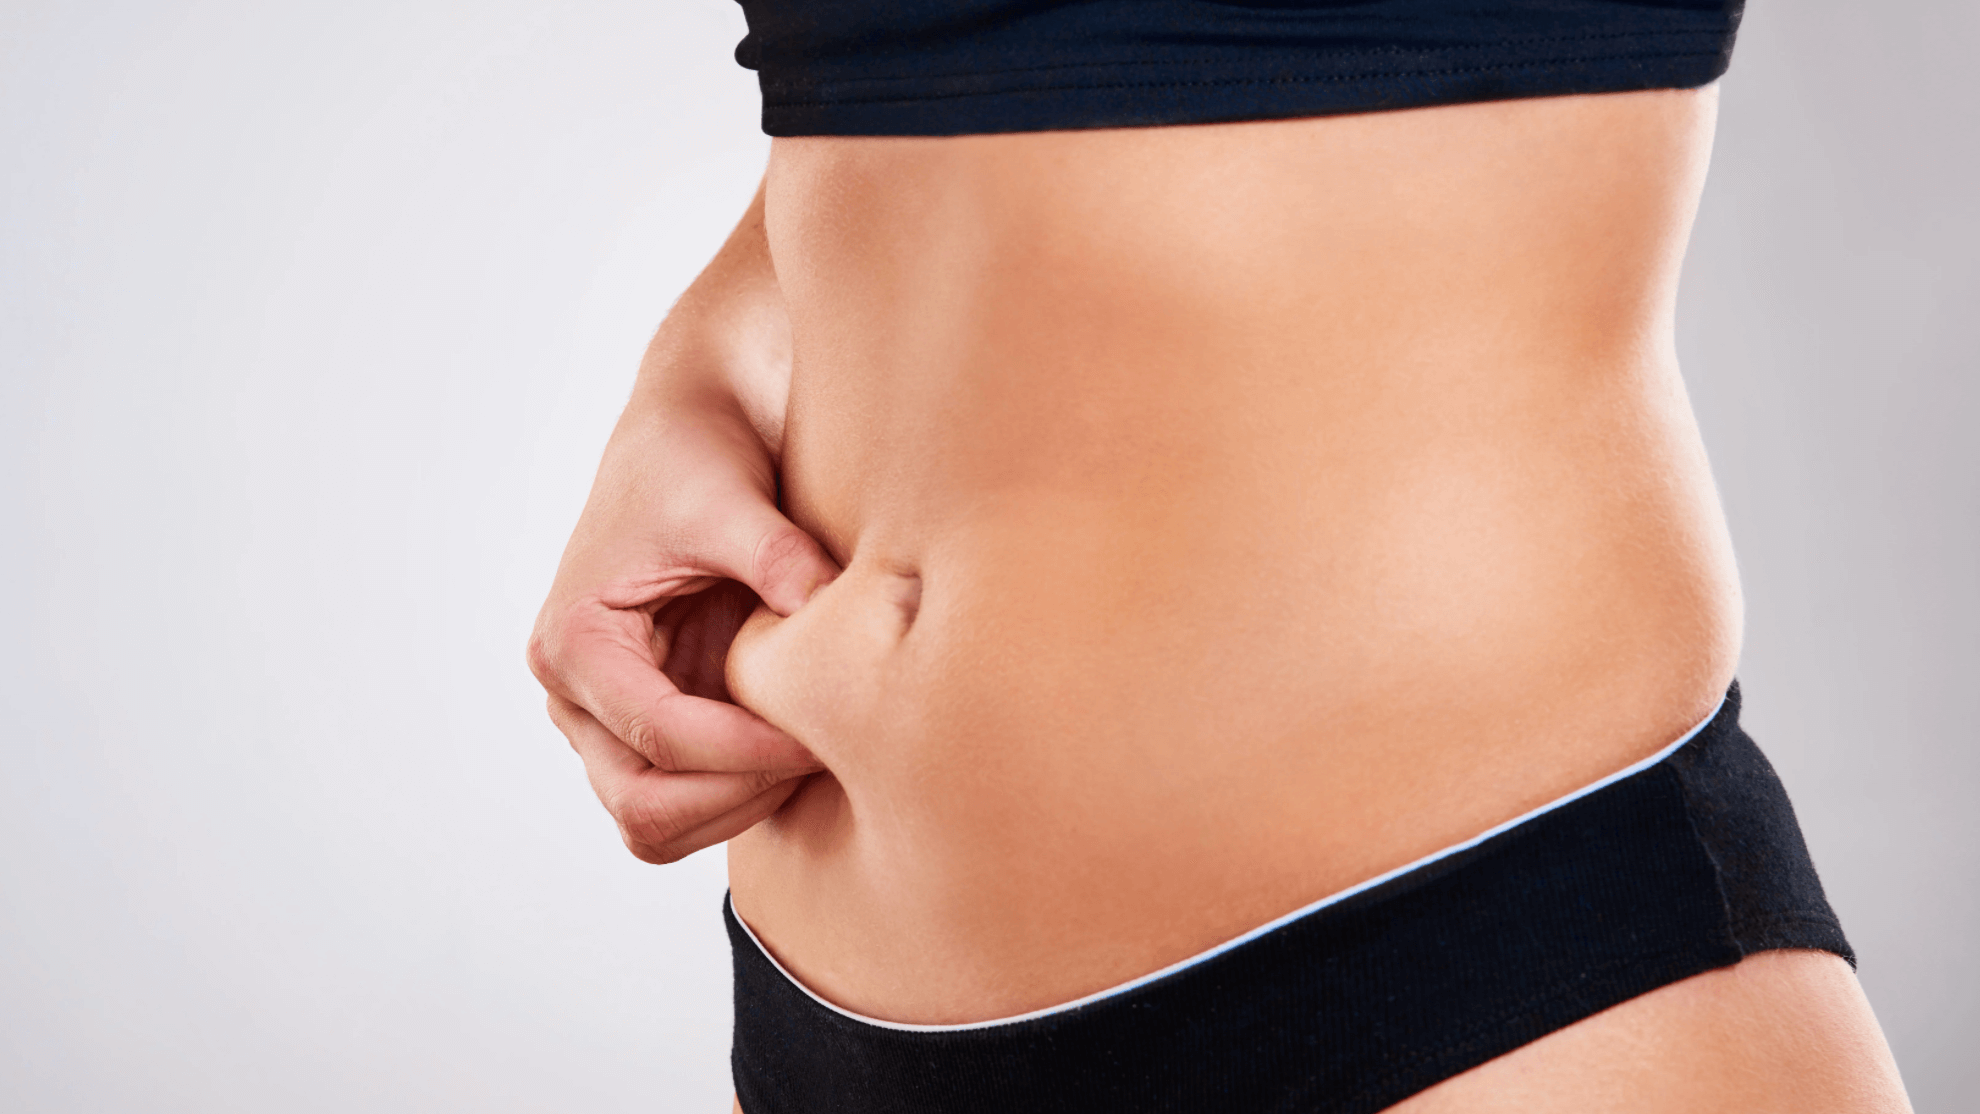 Why Your Protruding Belly Might Not Be Fat - The Fix 